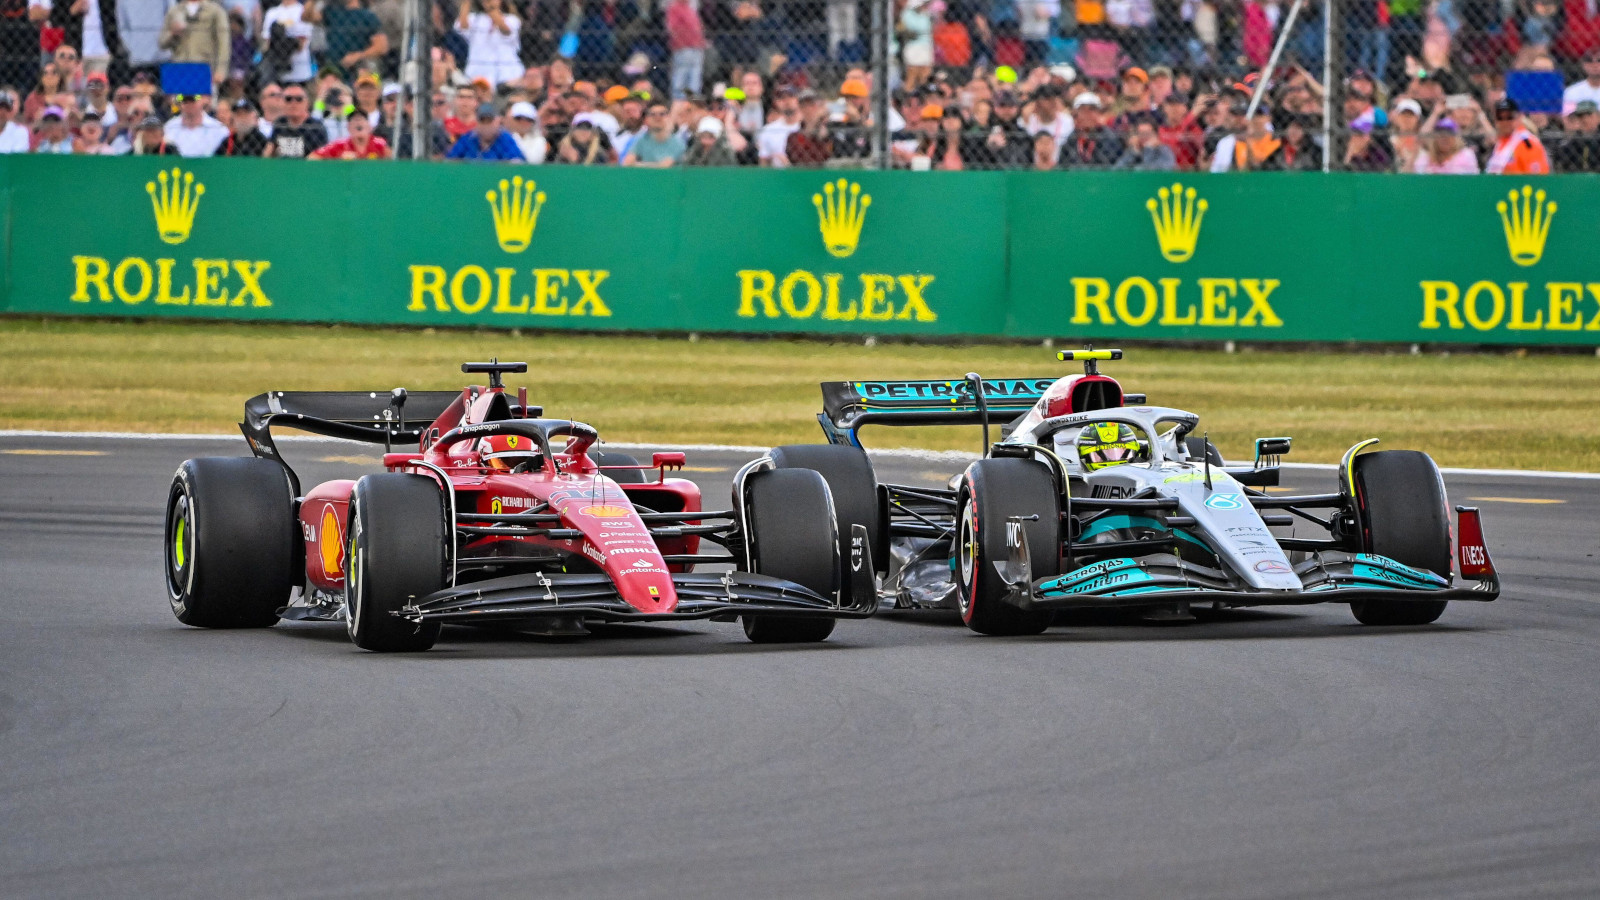 Charles Leclerc racing Lewis Hamilton. Silverstone July 2022